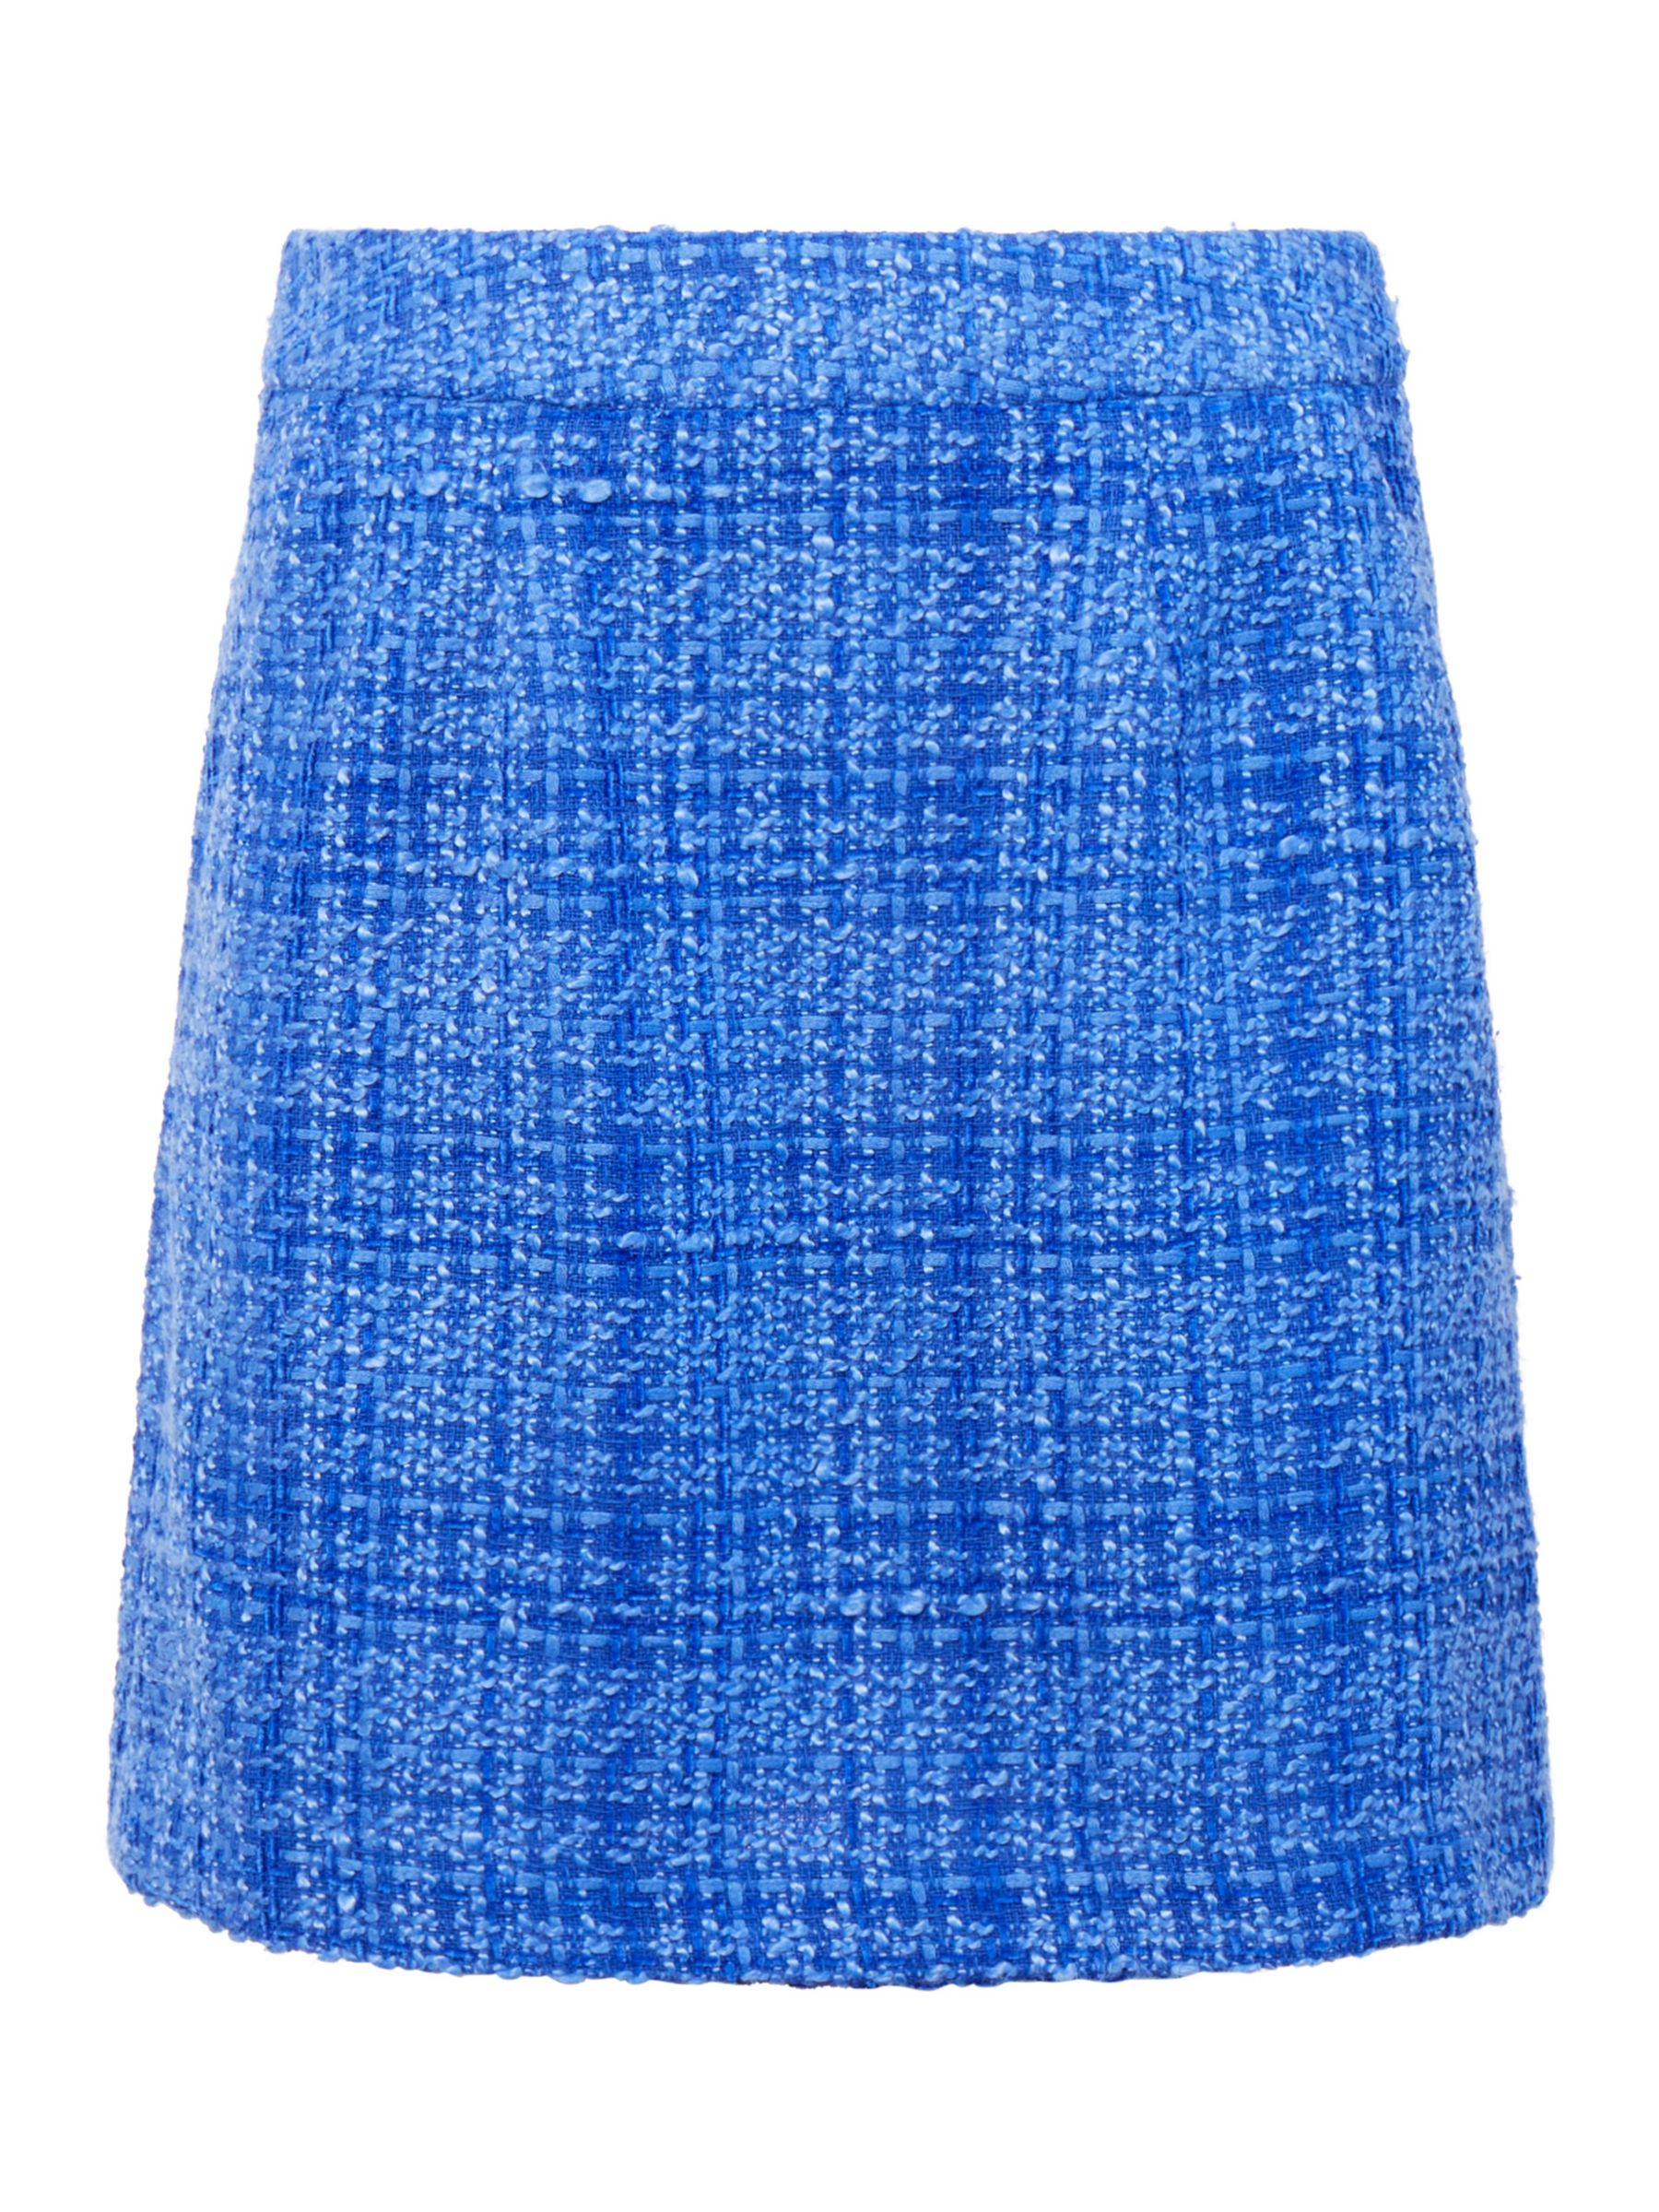 Buy French Connection Azzurra Tweed Mini Skirt, Light Blue Depths Online at johnlewis.com